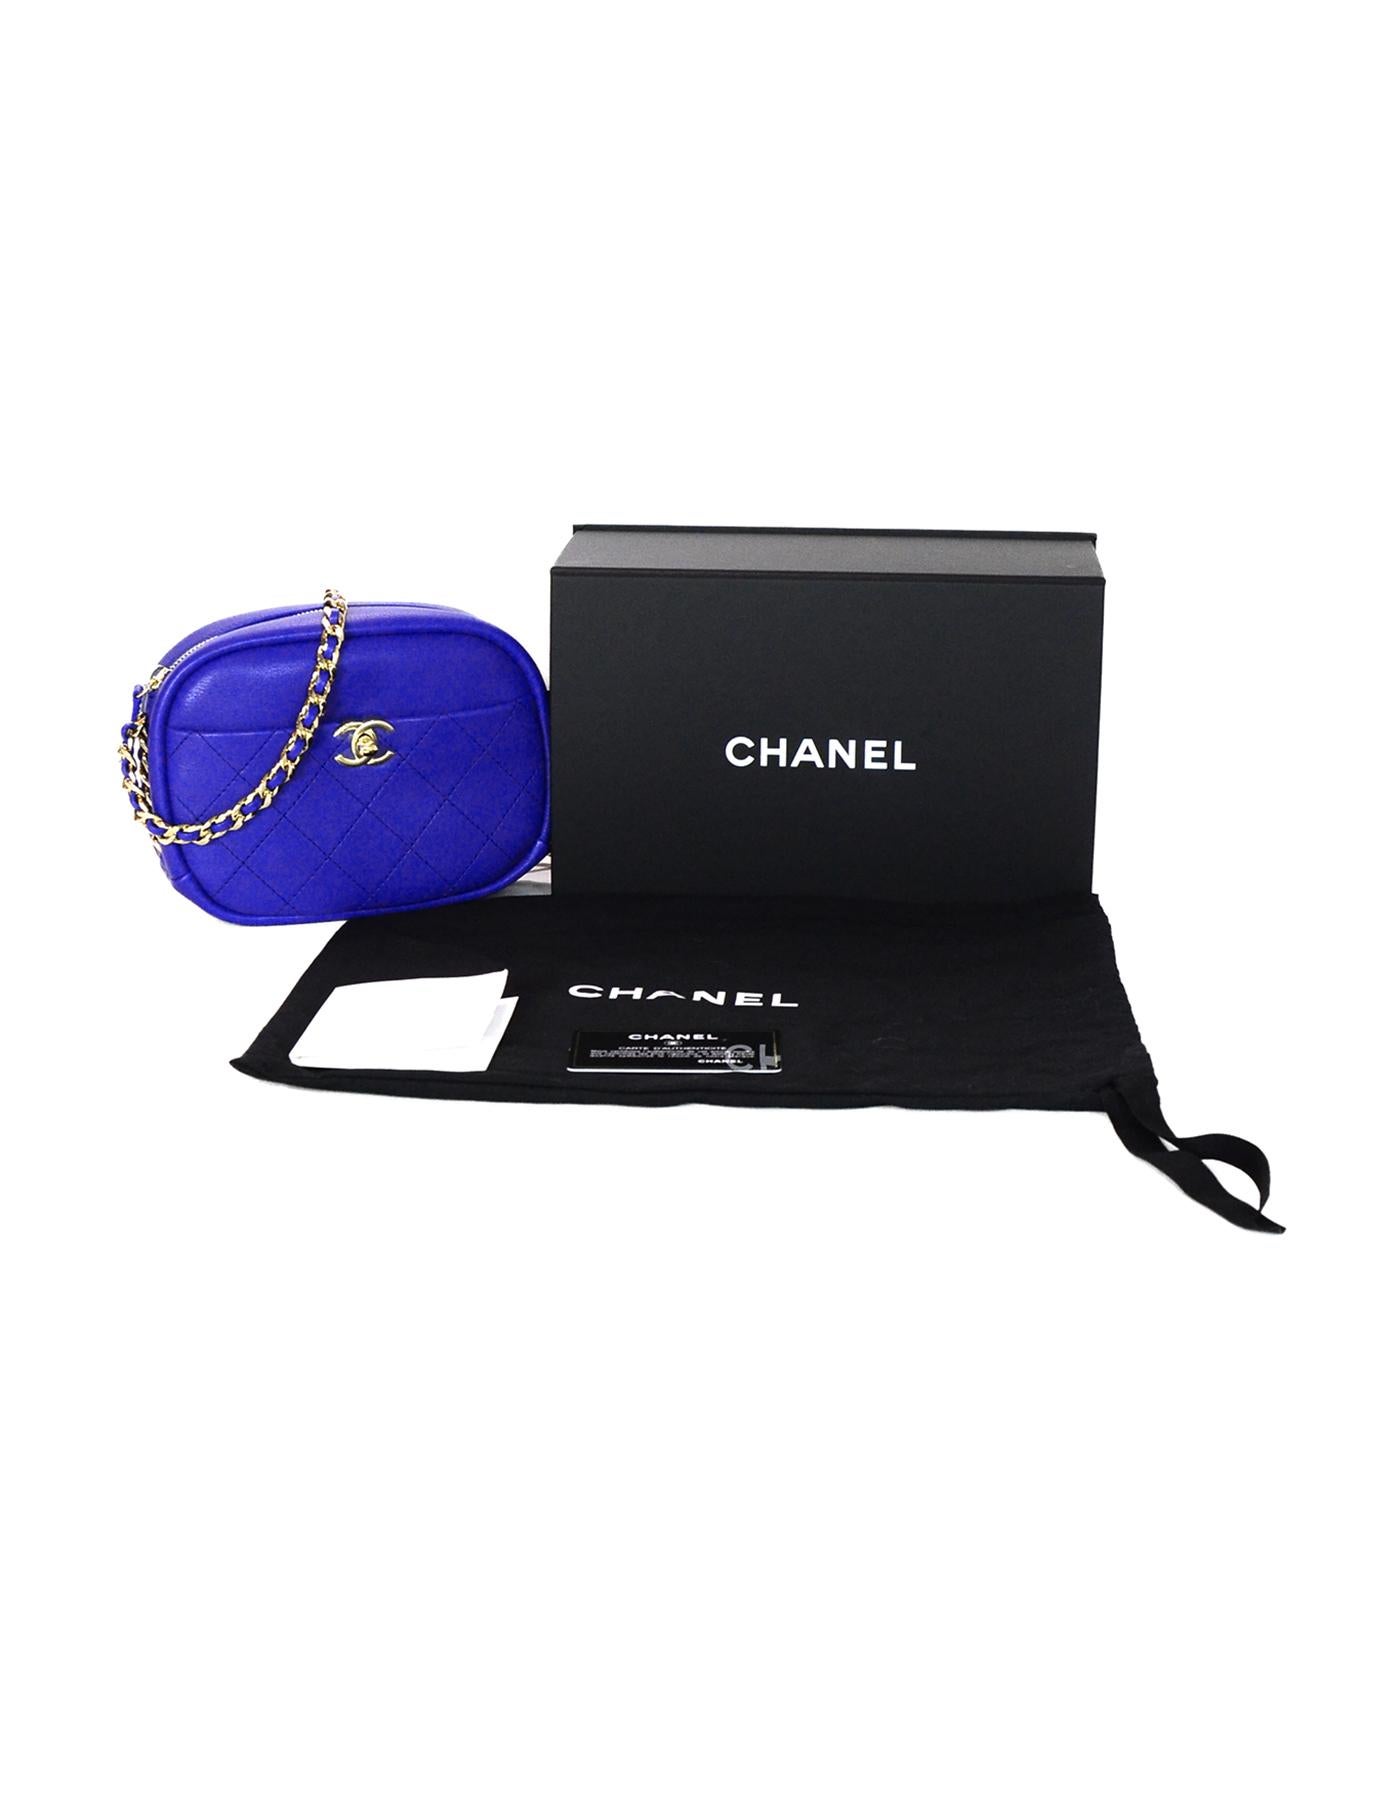 Chanel 2018 Royal Blue Leather Quilted CC Camera Crossbody Bag w. Receipt 2